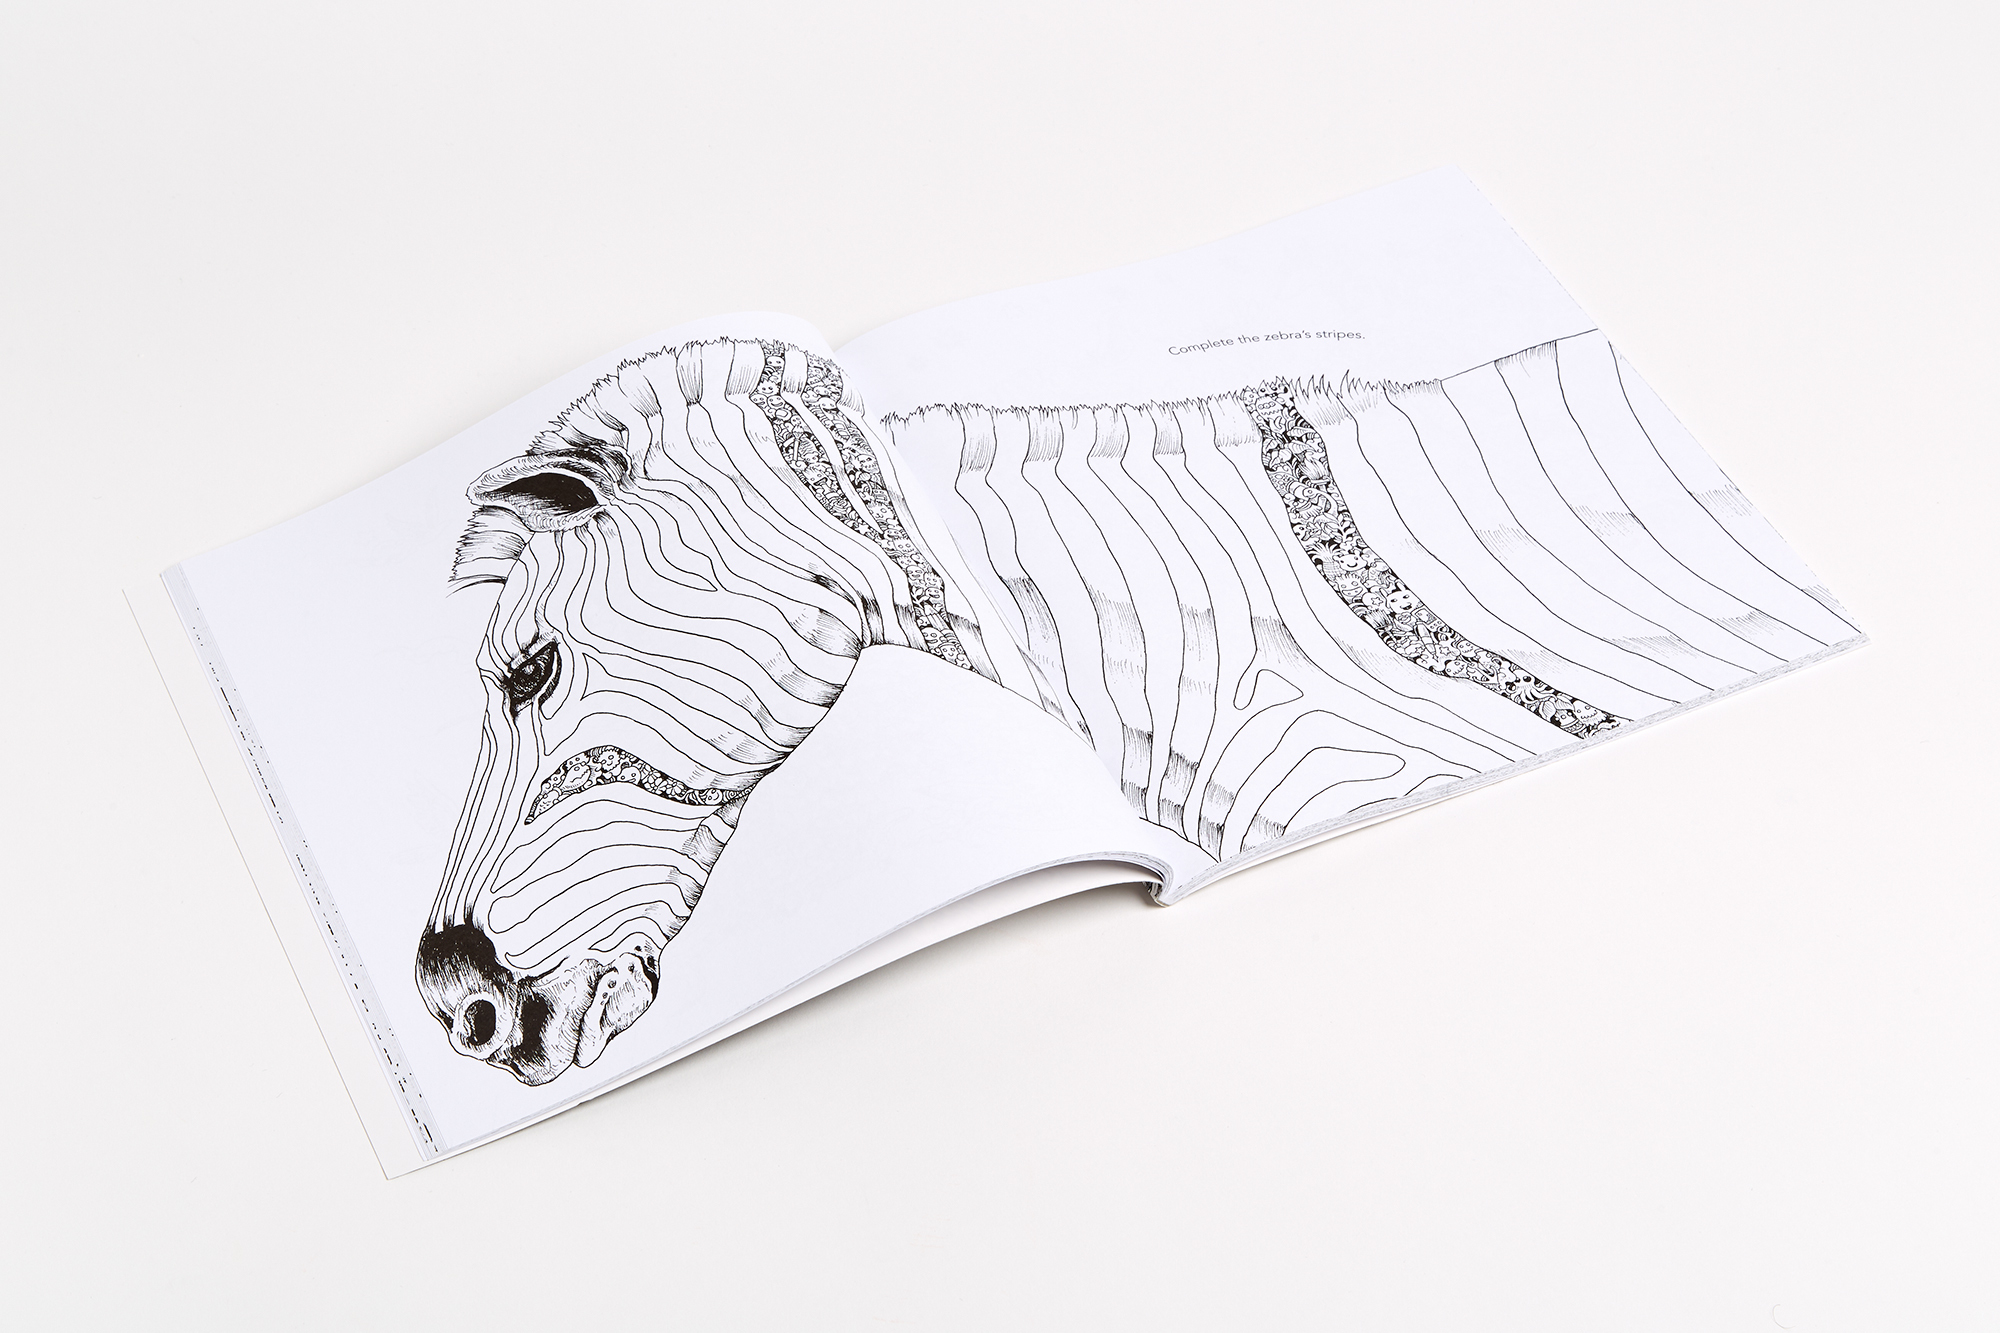 Is This the Most Intricate Adult Coloring Book EVER? (Kerby